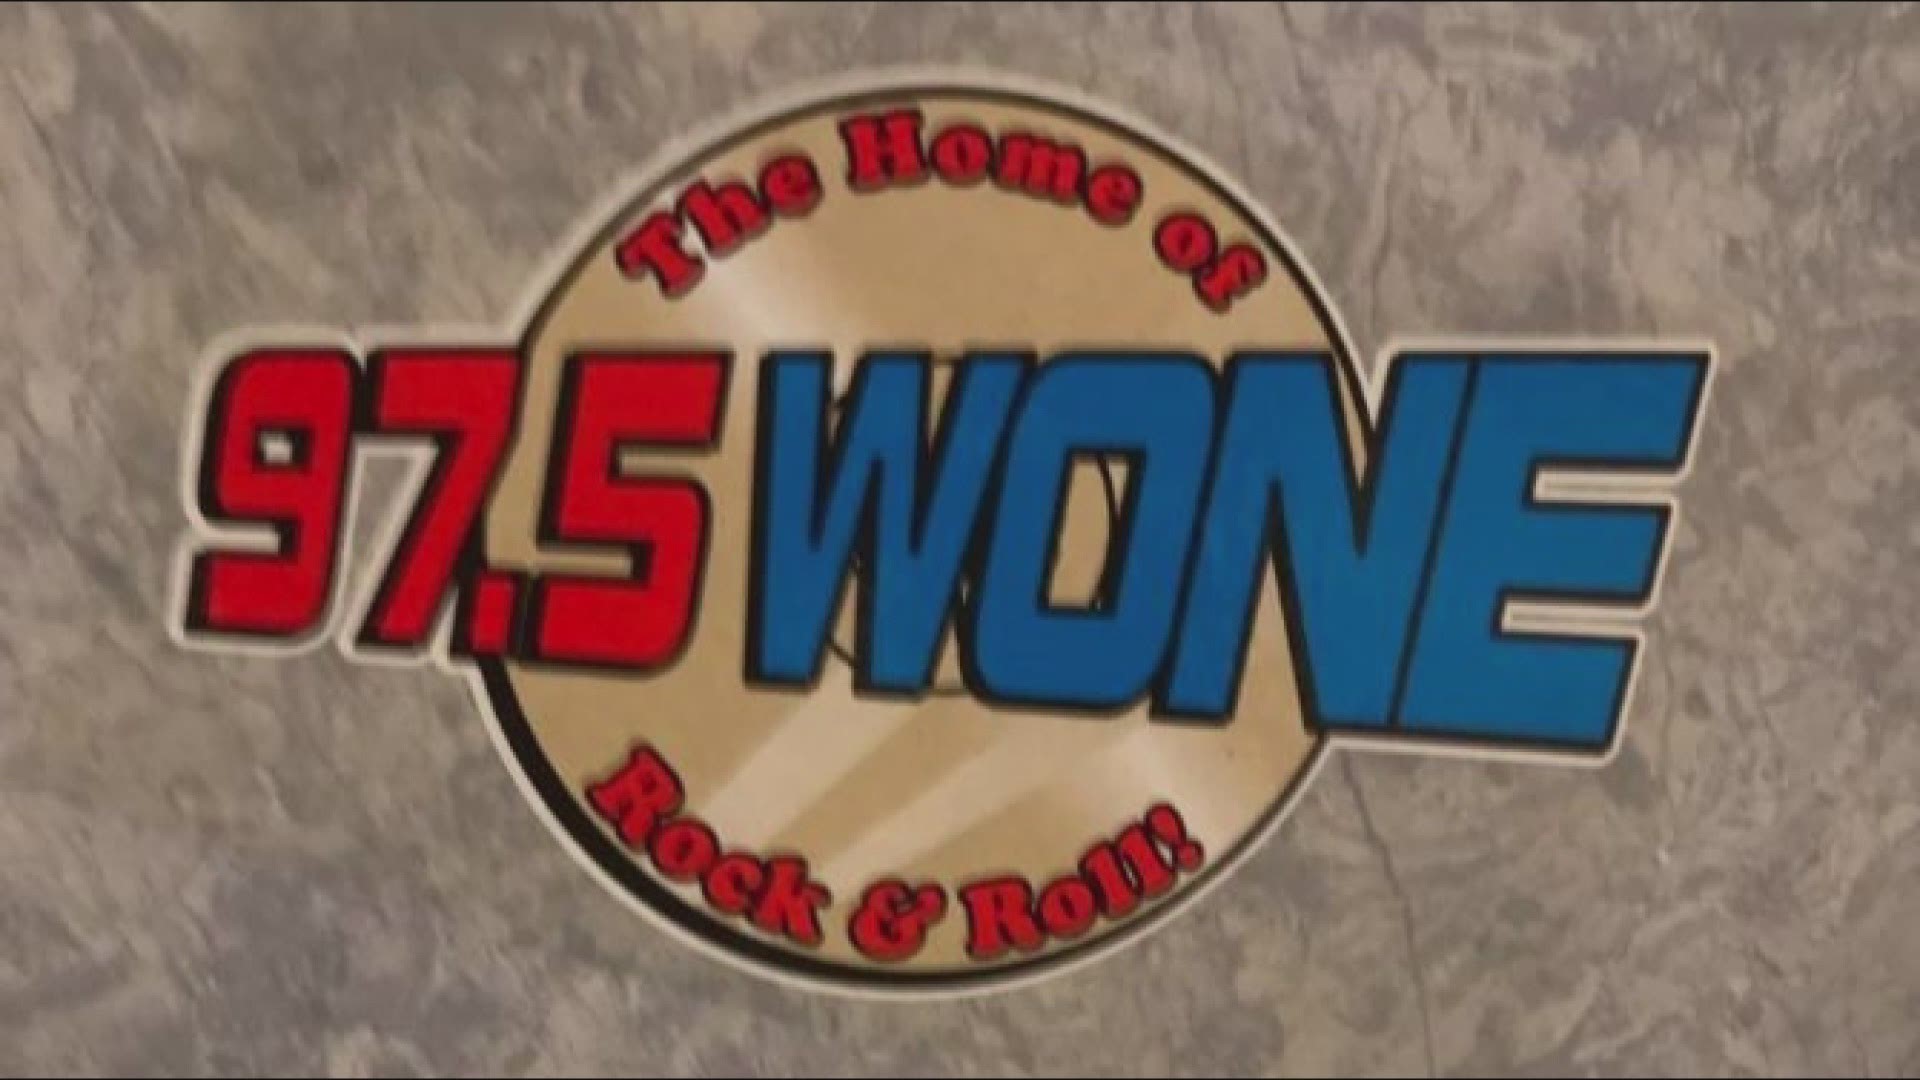 Something is happening at 97.5 WONE that has listeners concerned about the fate of their favorite radio station. It all started when WONE began airing a commercial regarding an announcement they will be making next week. “After sharing over 30 years of your life, it’s been fun. On Monday, March 11 at 7 a.m., the time has come for 97.5 WONE to say farewell.”